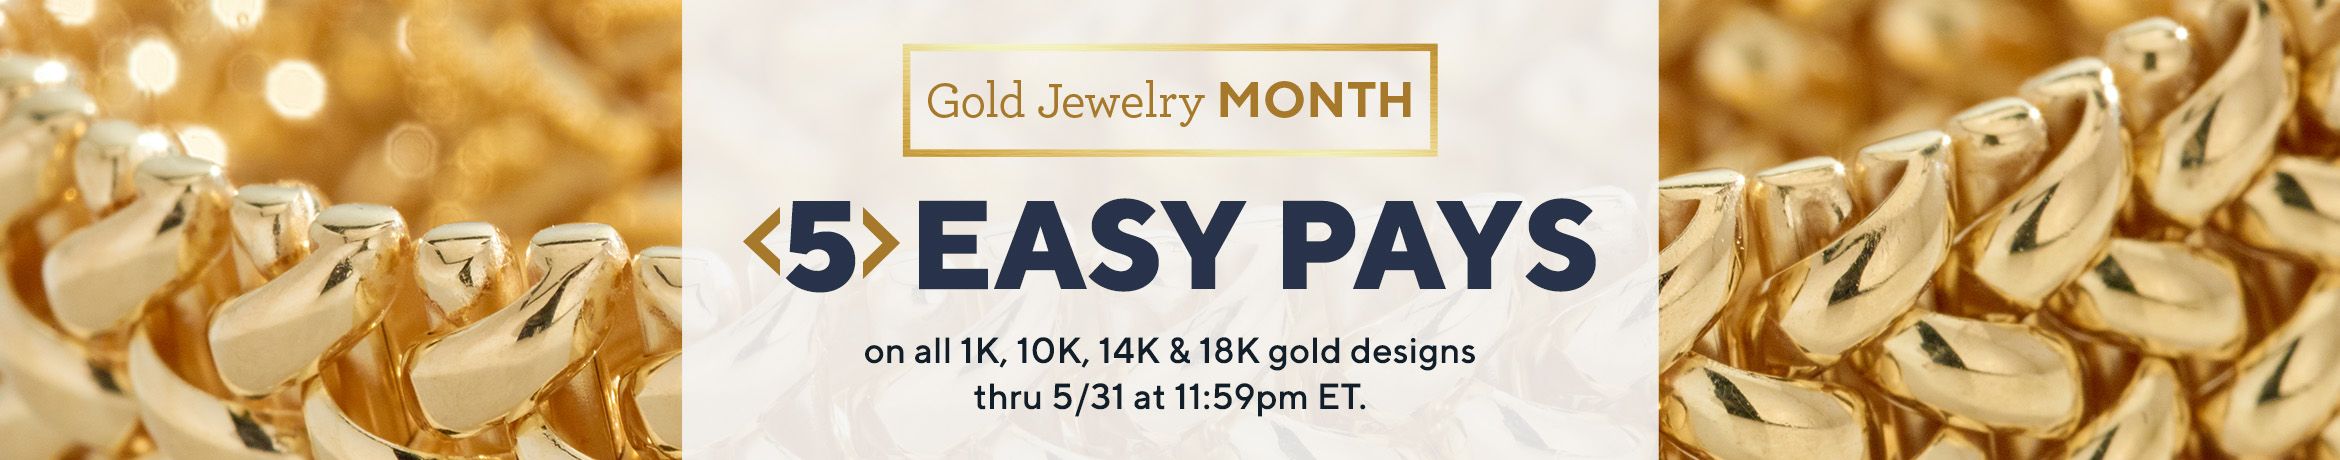 Gold Jewelry Month - 5 Easy Pays on all 1K, 10K, 14K & 18K gold designs thru 5/31 at 11:59pm ET.